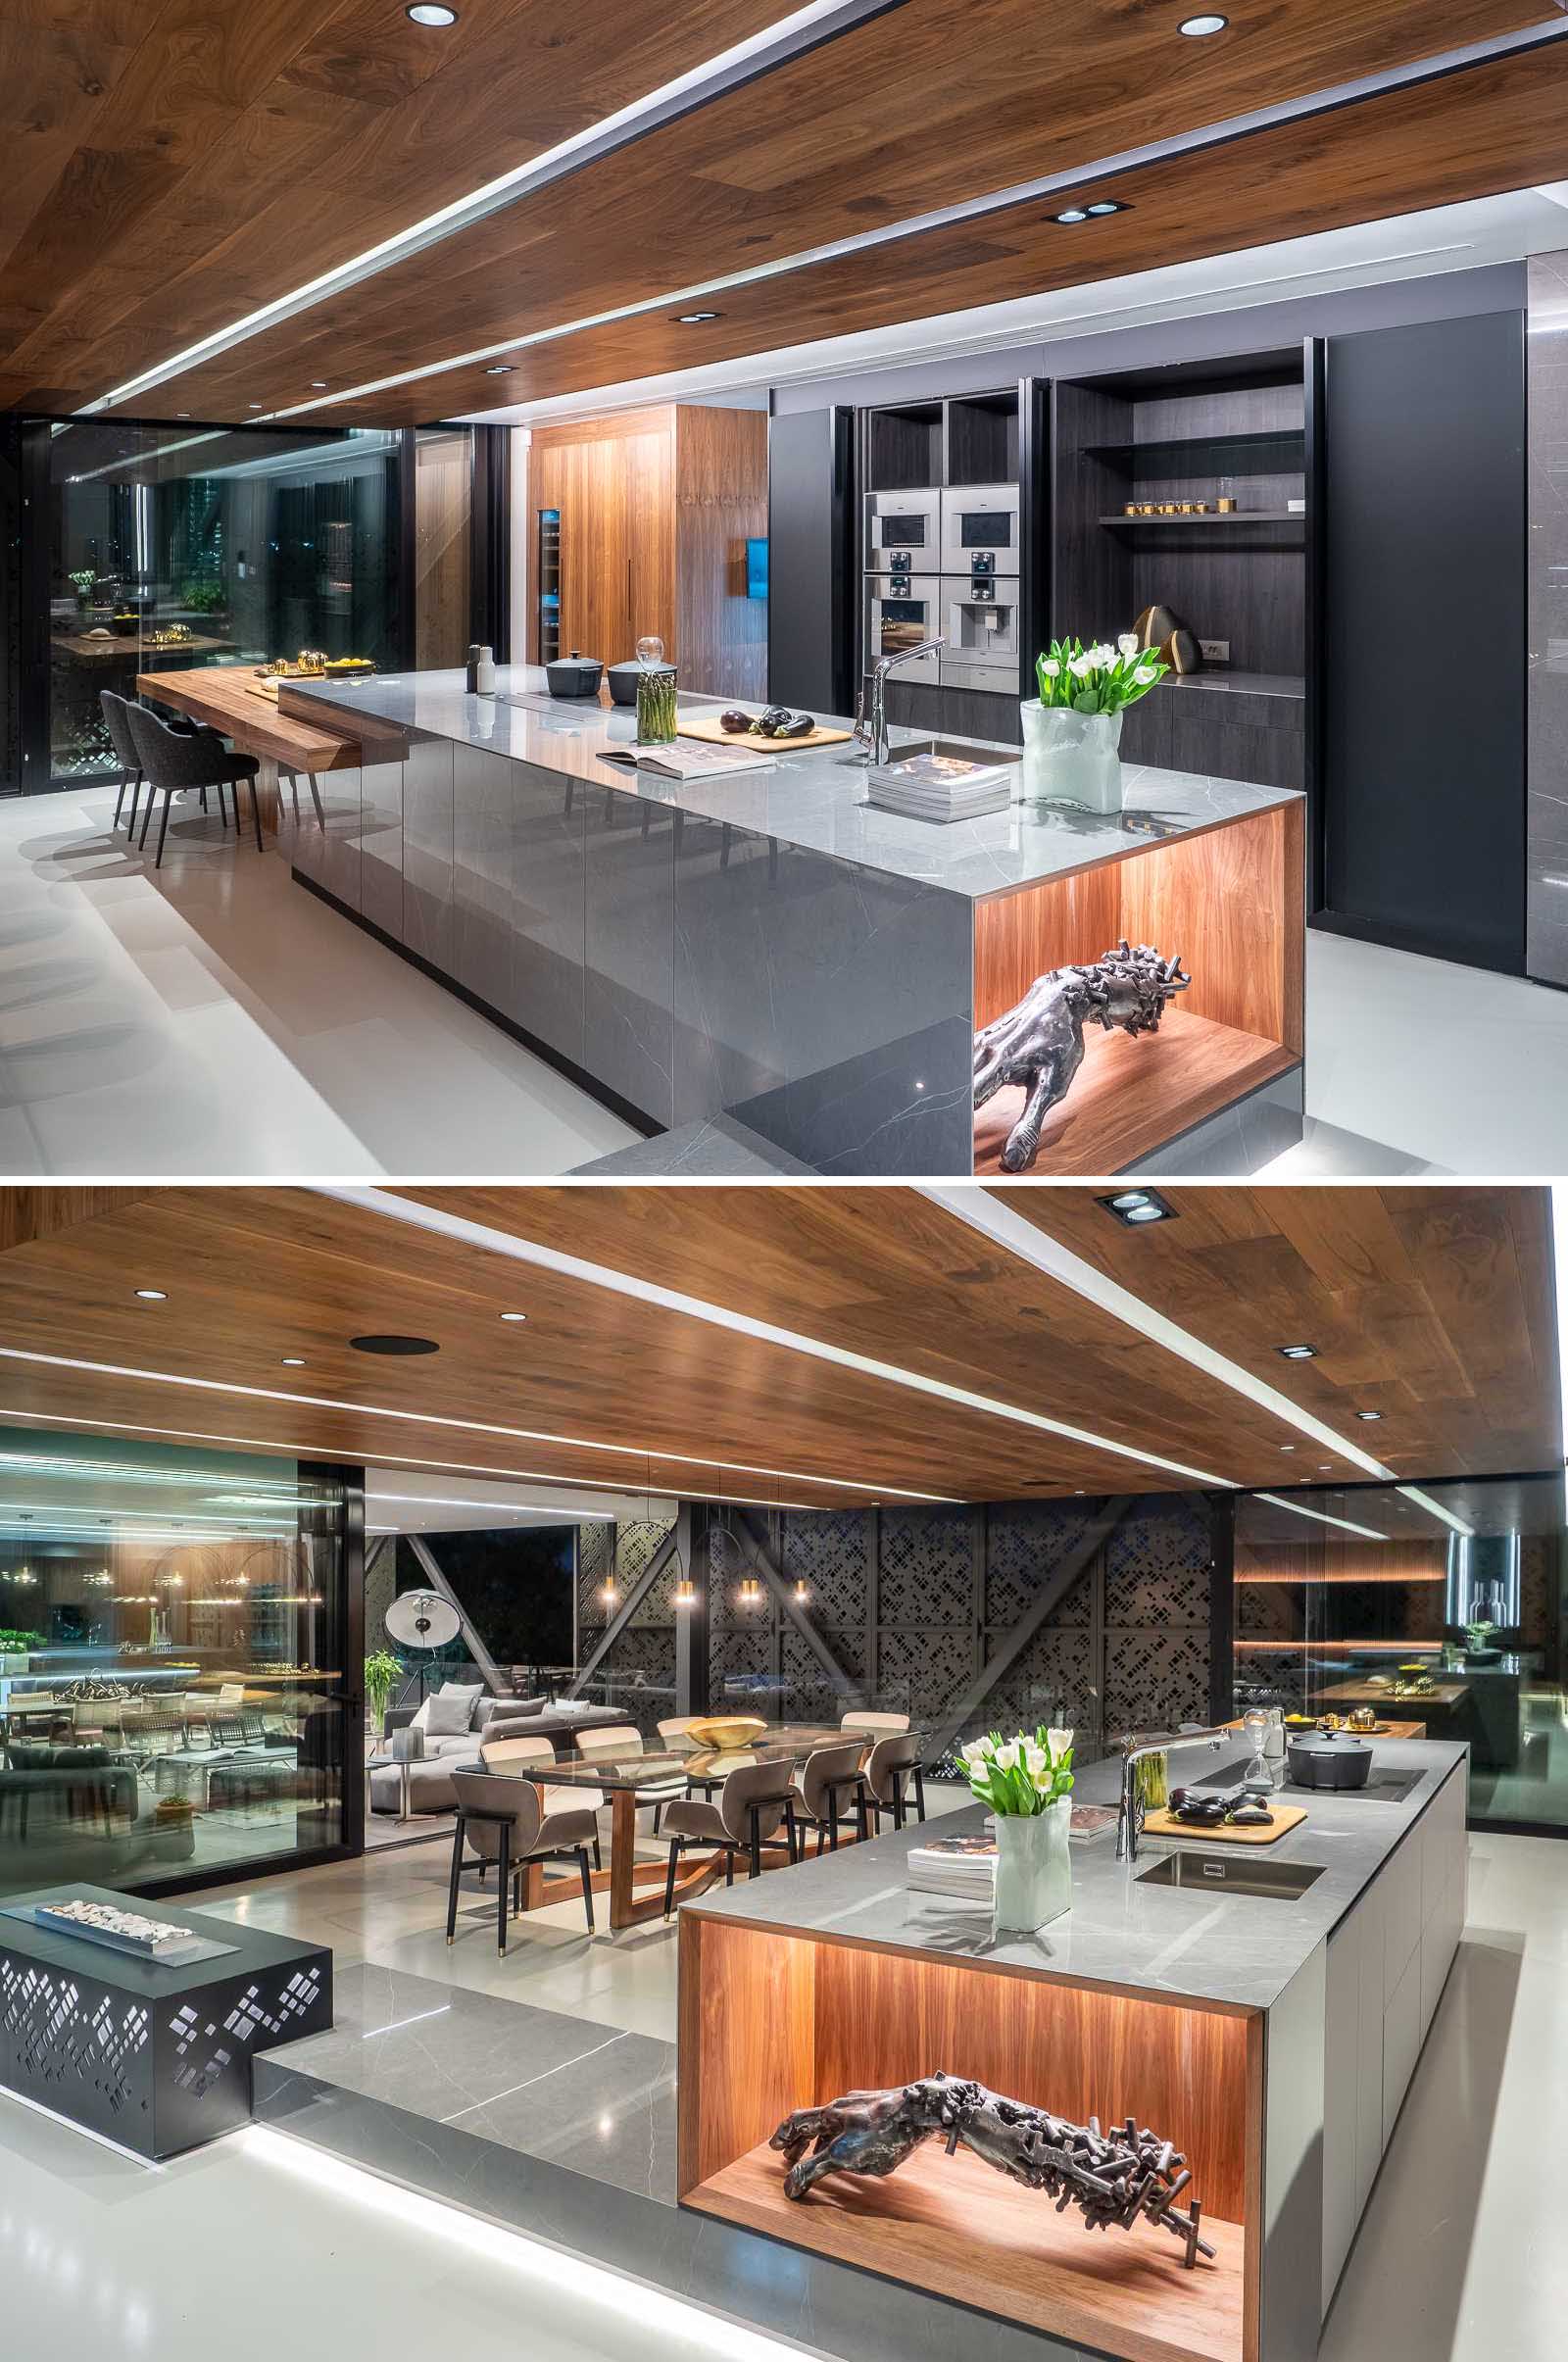 In this modern kitchen, black cabinets have been combined with wood and metal accents. At the end of the island, there's a casual dining area. Adjacent to the kitchen is the main dining area with a large glass table that has a wood base.